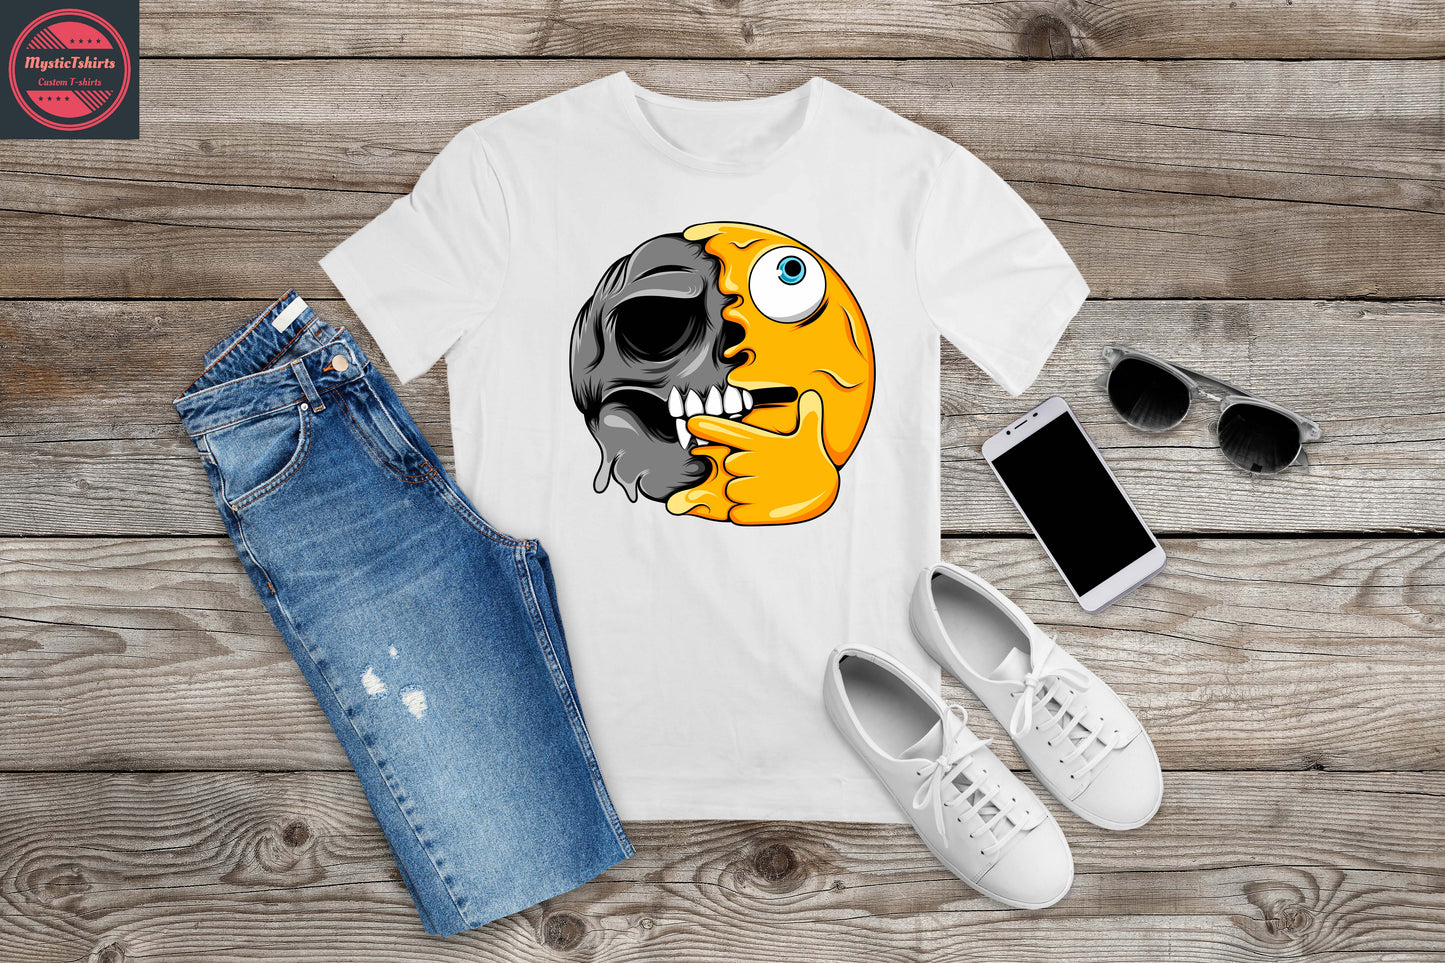 077. CRAZY FACE, Personalized T-Shirt, Custom Text, Make Your Own Shirt, Custom Tee